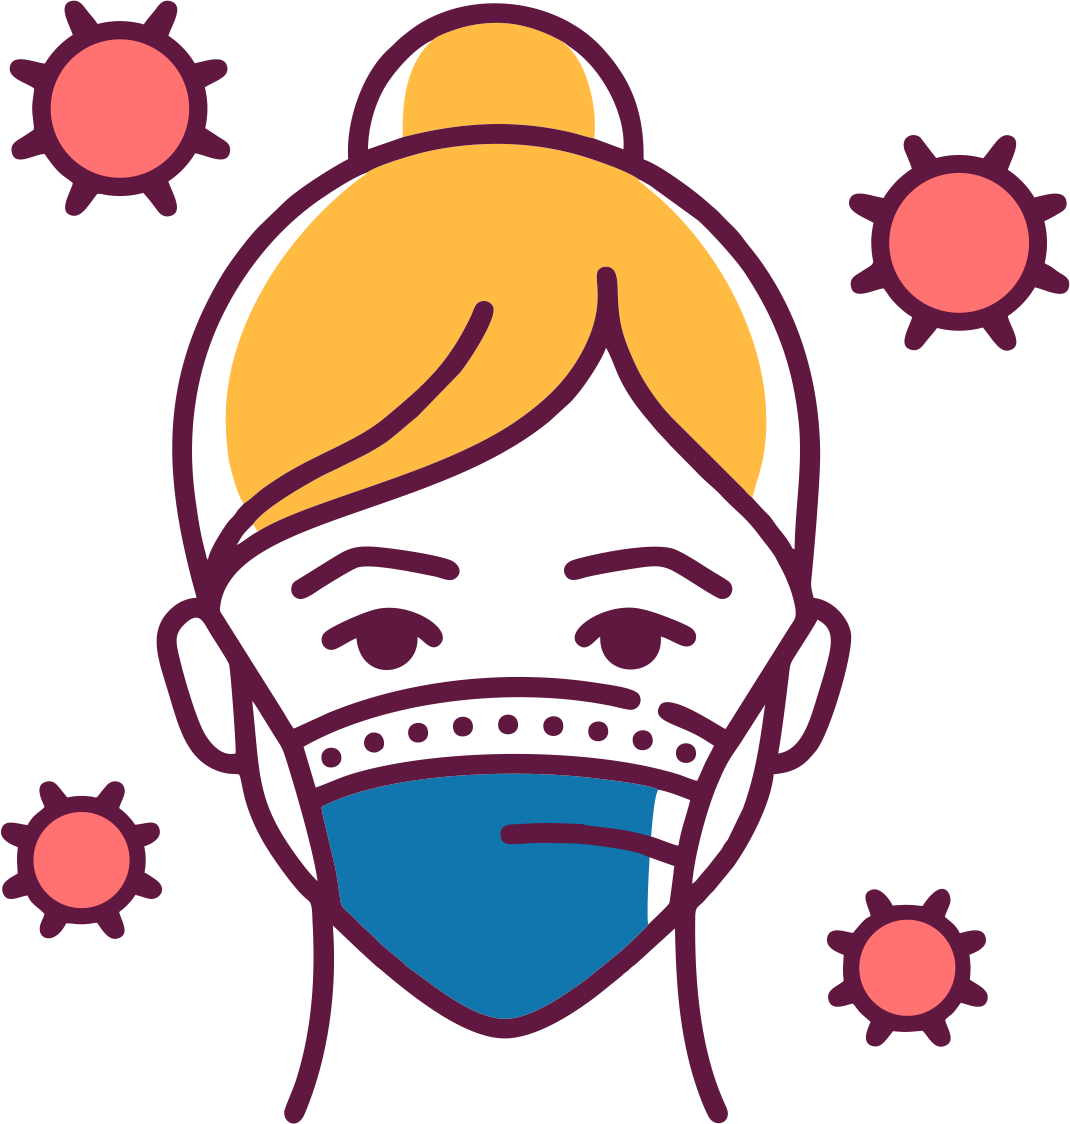 Wearing masks can prevent viral diseases